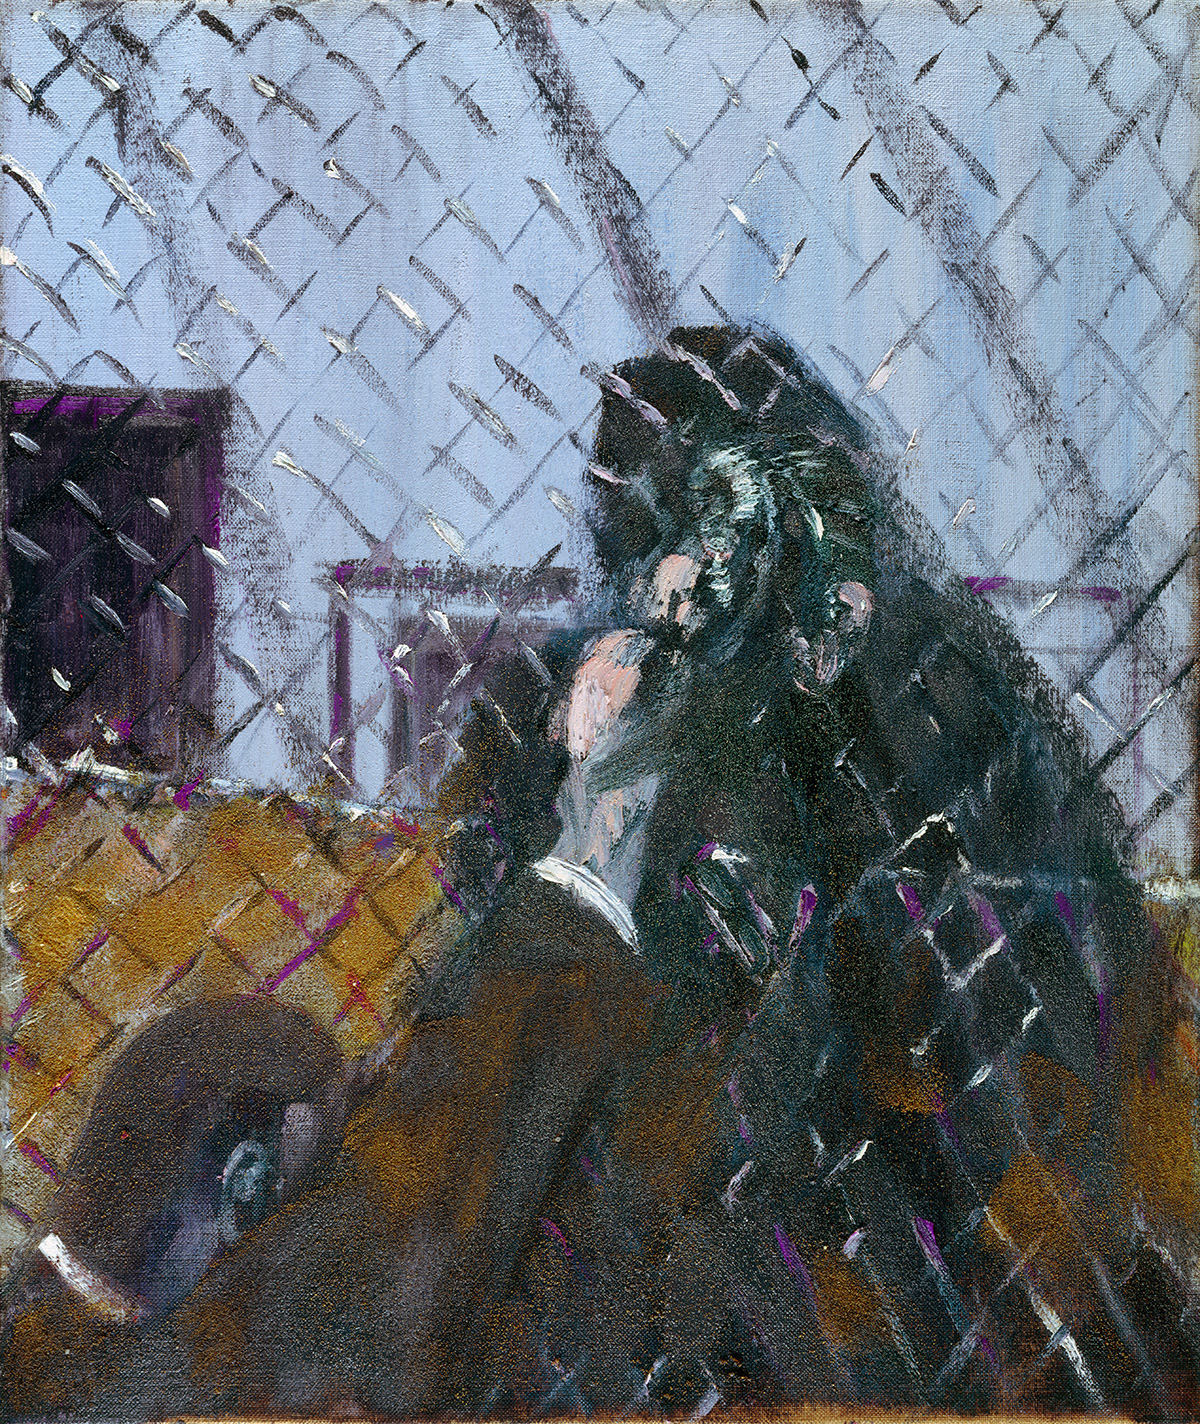 Image: Francis Bacon, Figure with Monkey, 1951. Oil on canvas. CR number 51-01. © The Estate of Francis Bacon / DACS London 2019. All rights reserved.